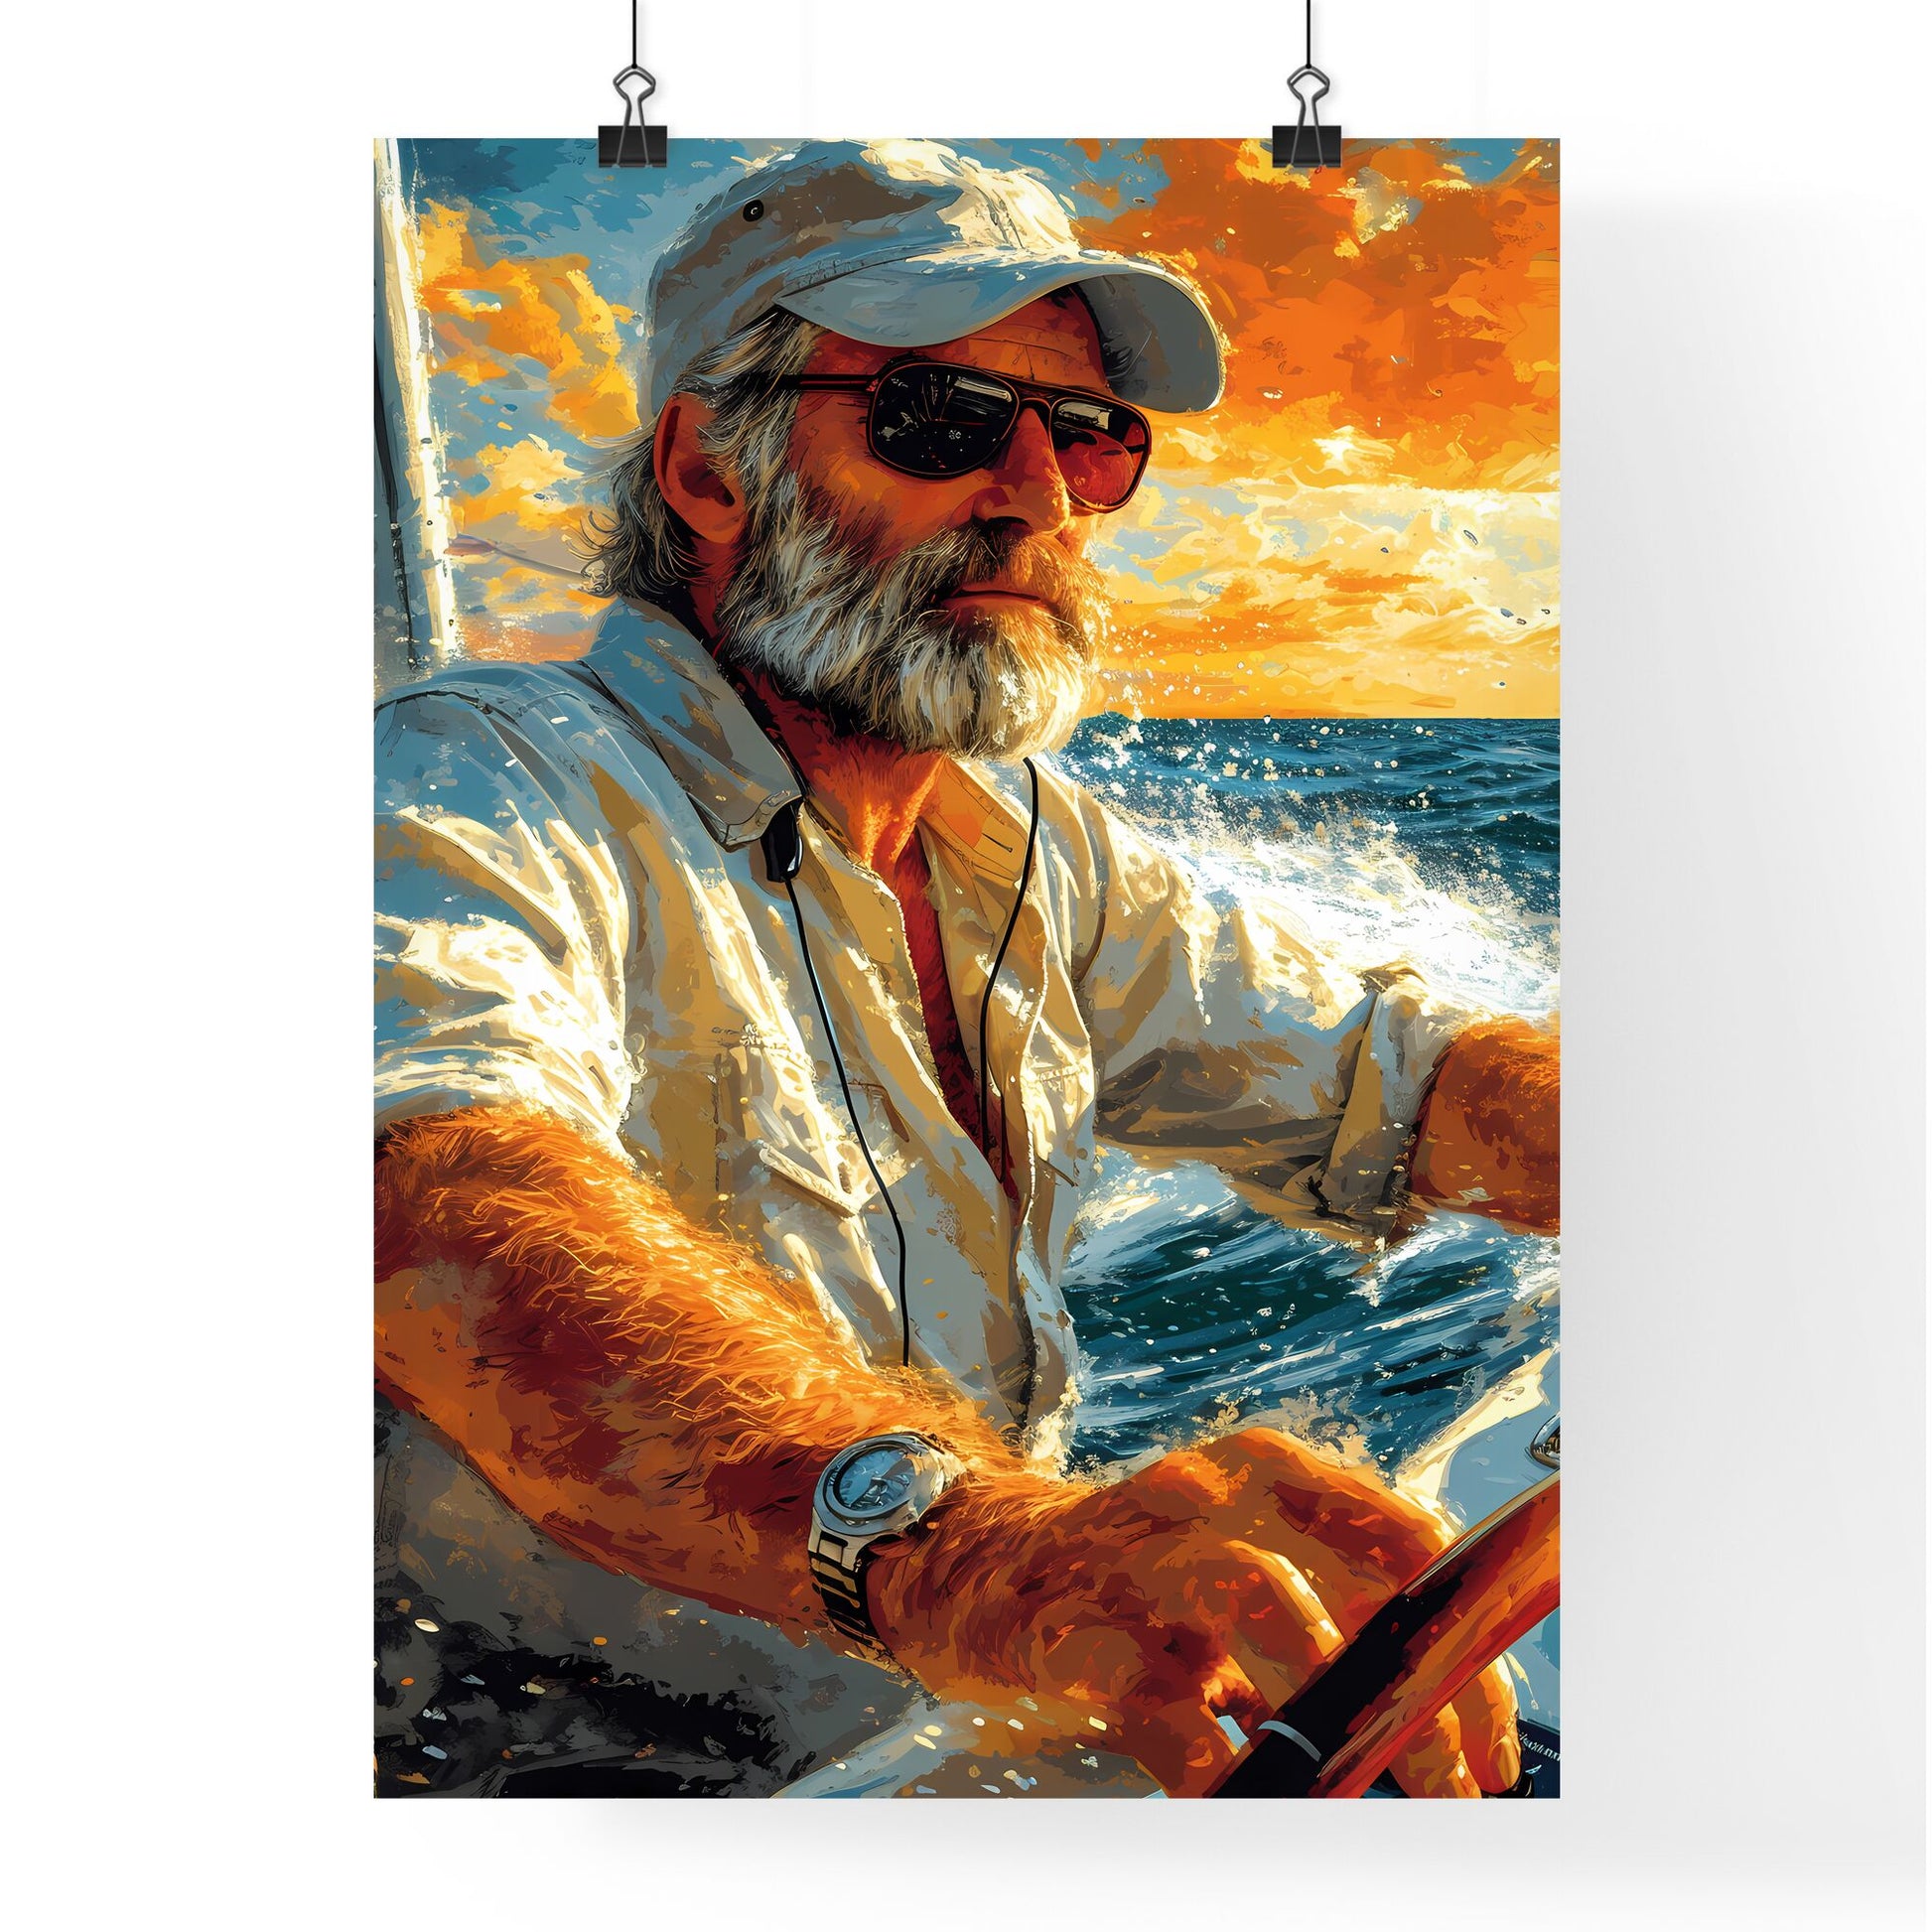 A TRENDY young GAMER - Art print of a man driving a boat Default Title